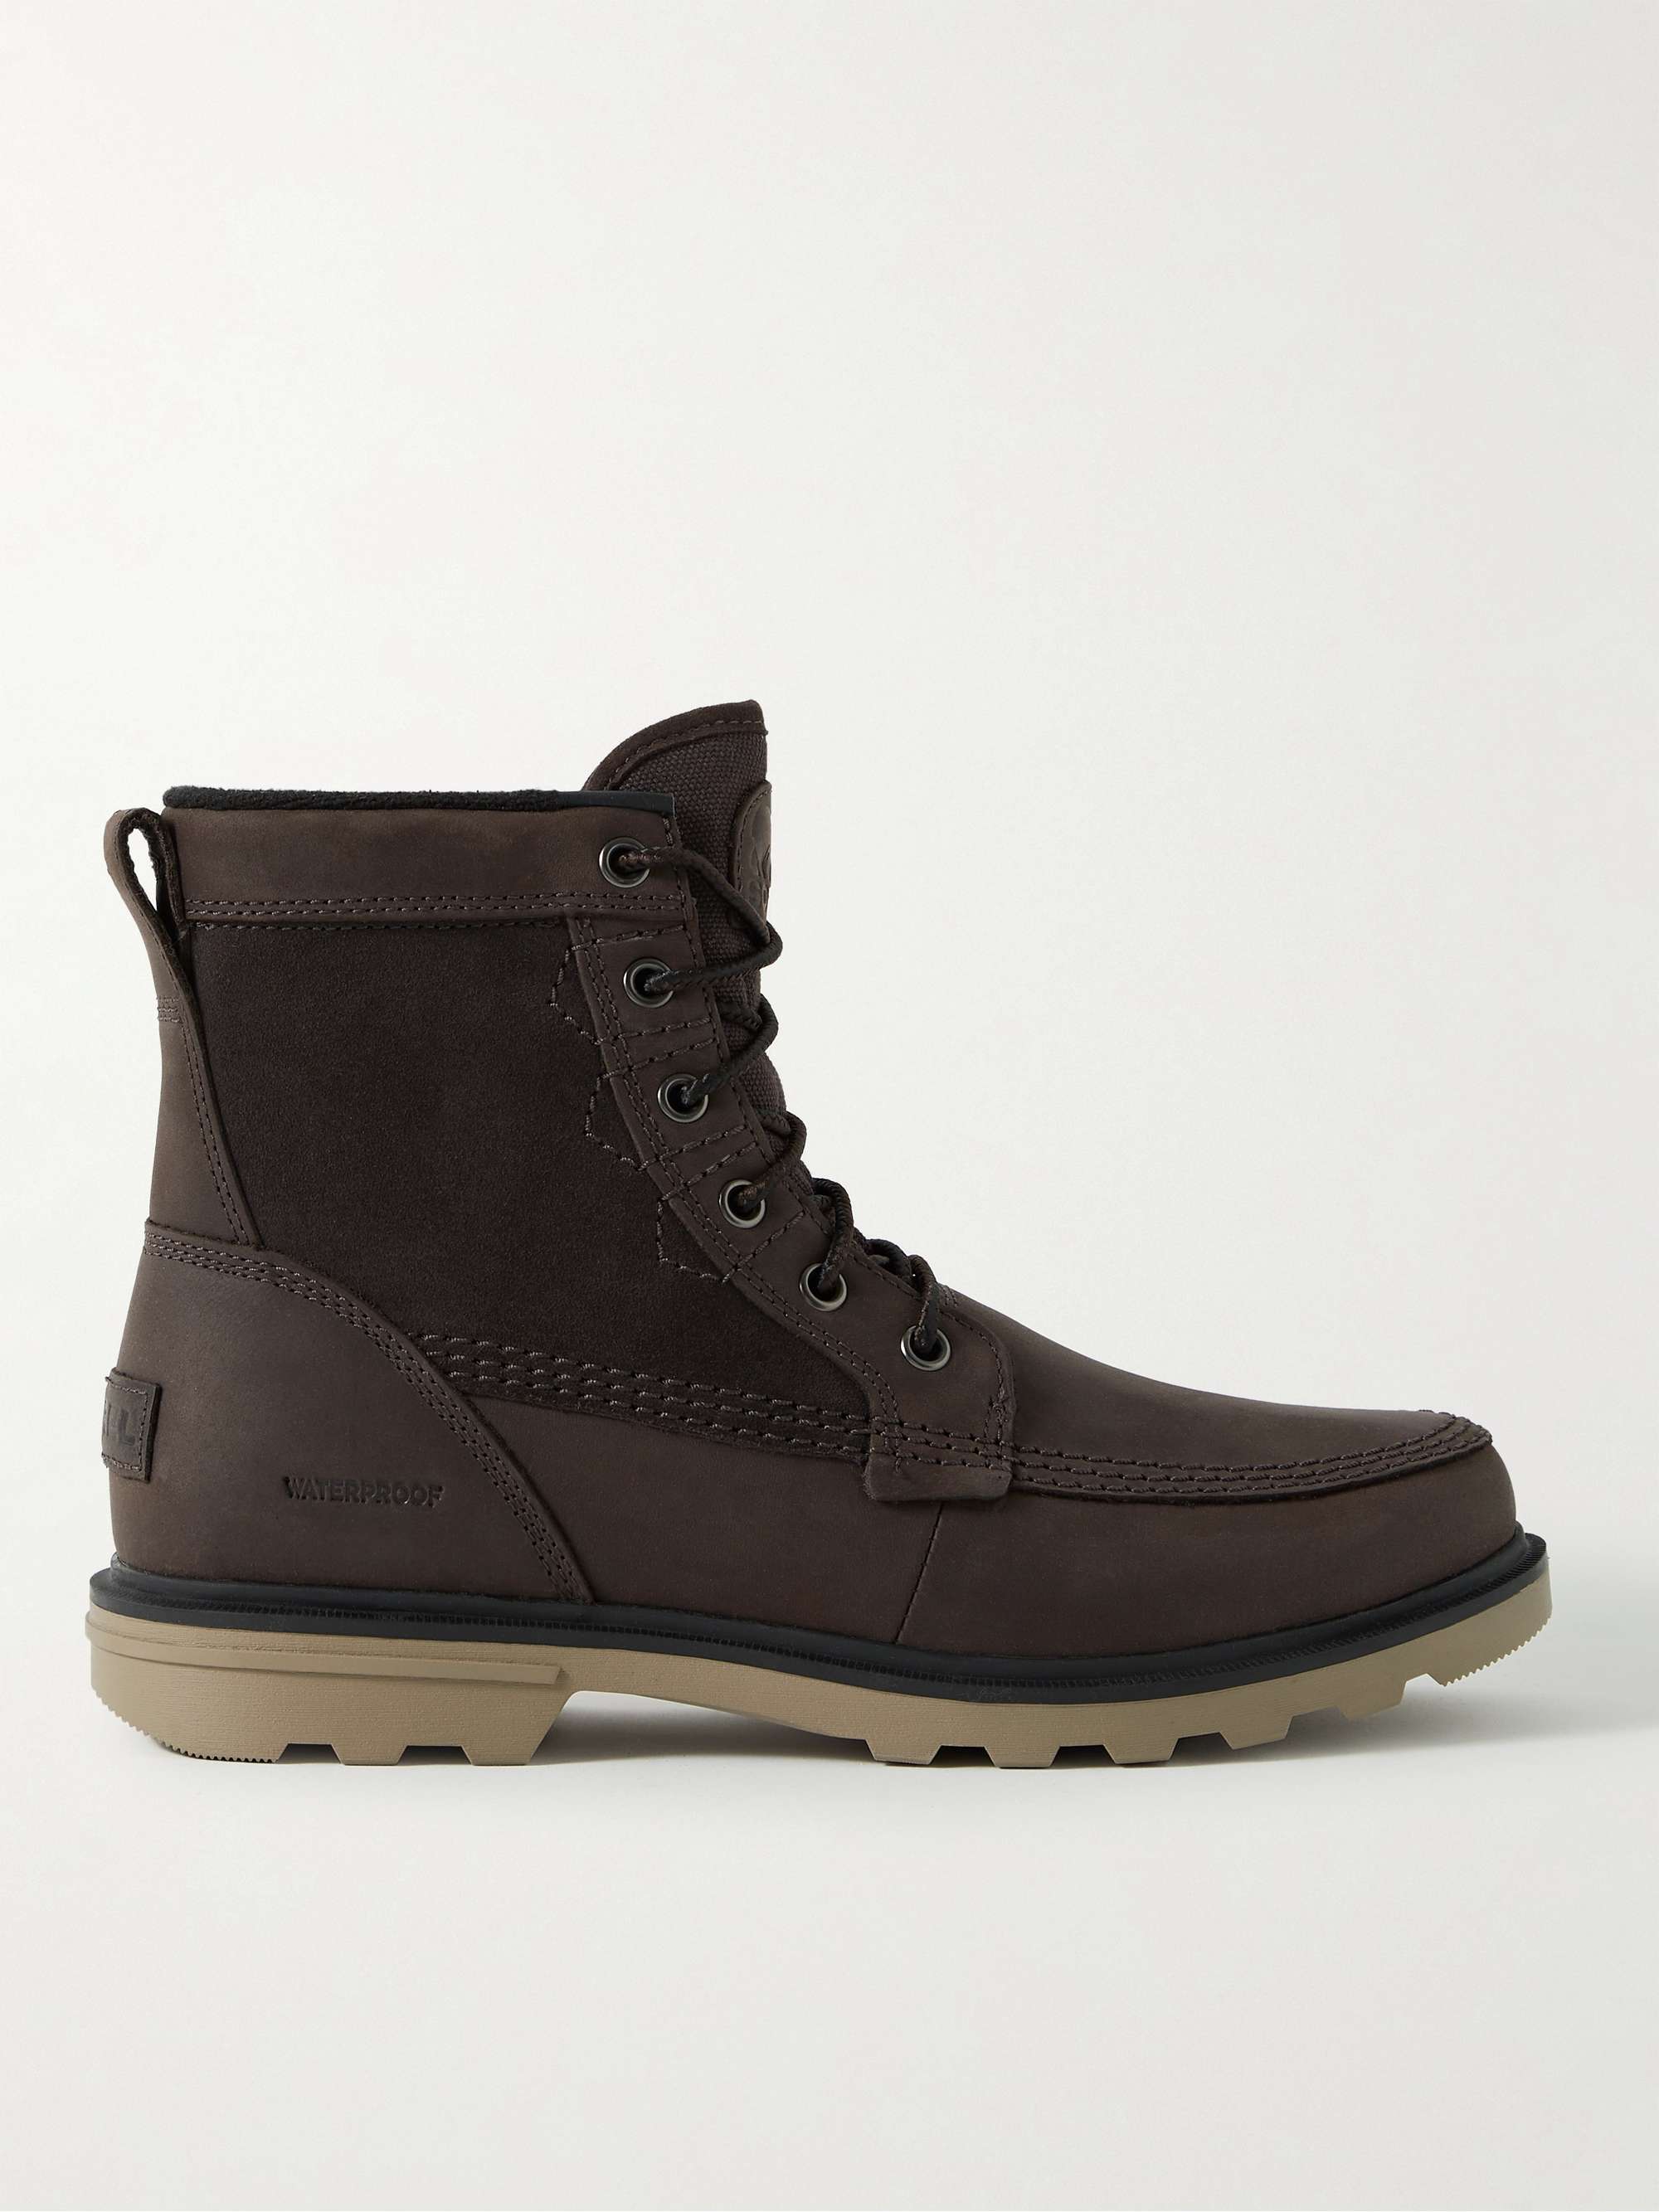 SOREL Carson™ Storm Fleece-Lined Leather, Canvas and Suede Boots | MR PORTER